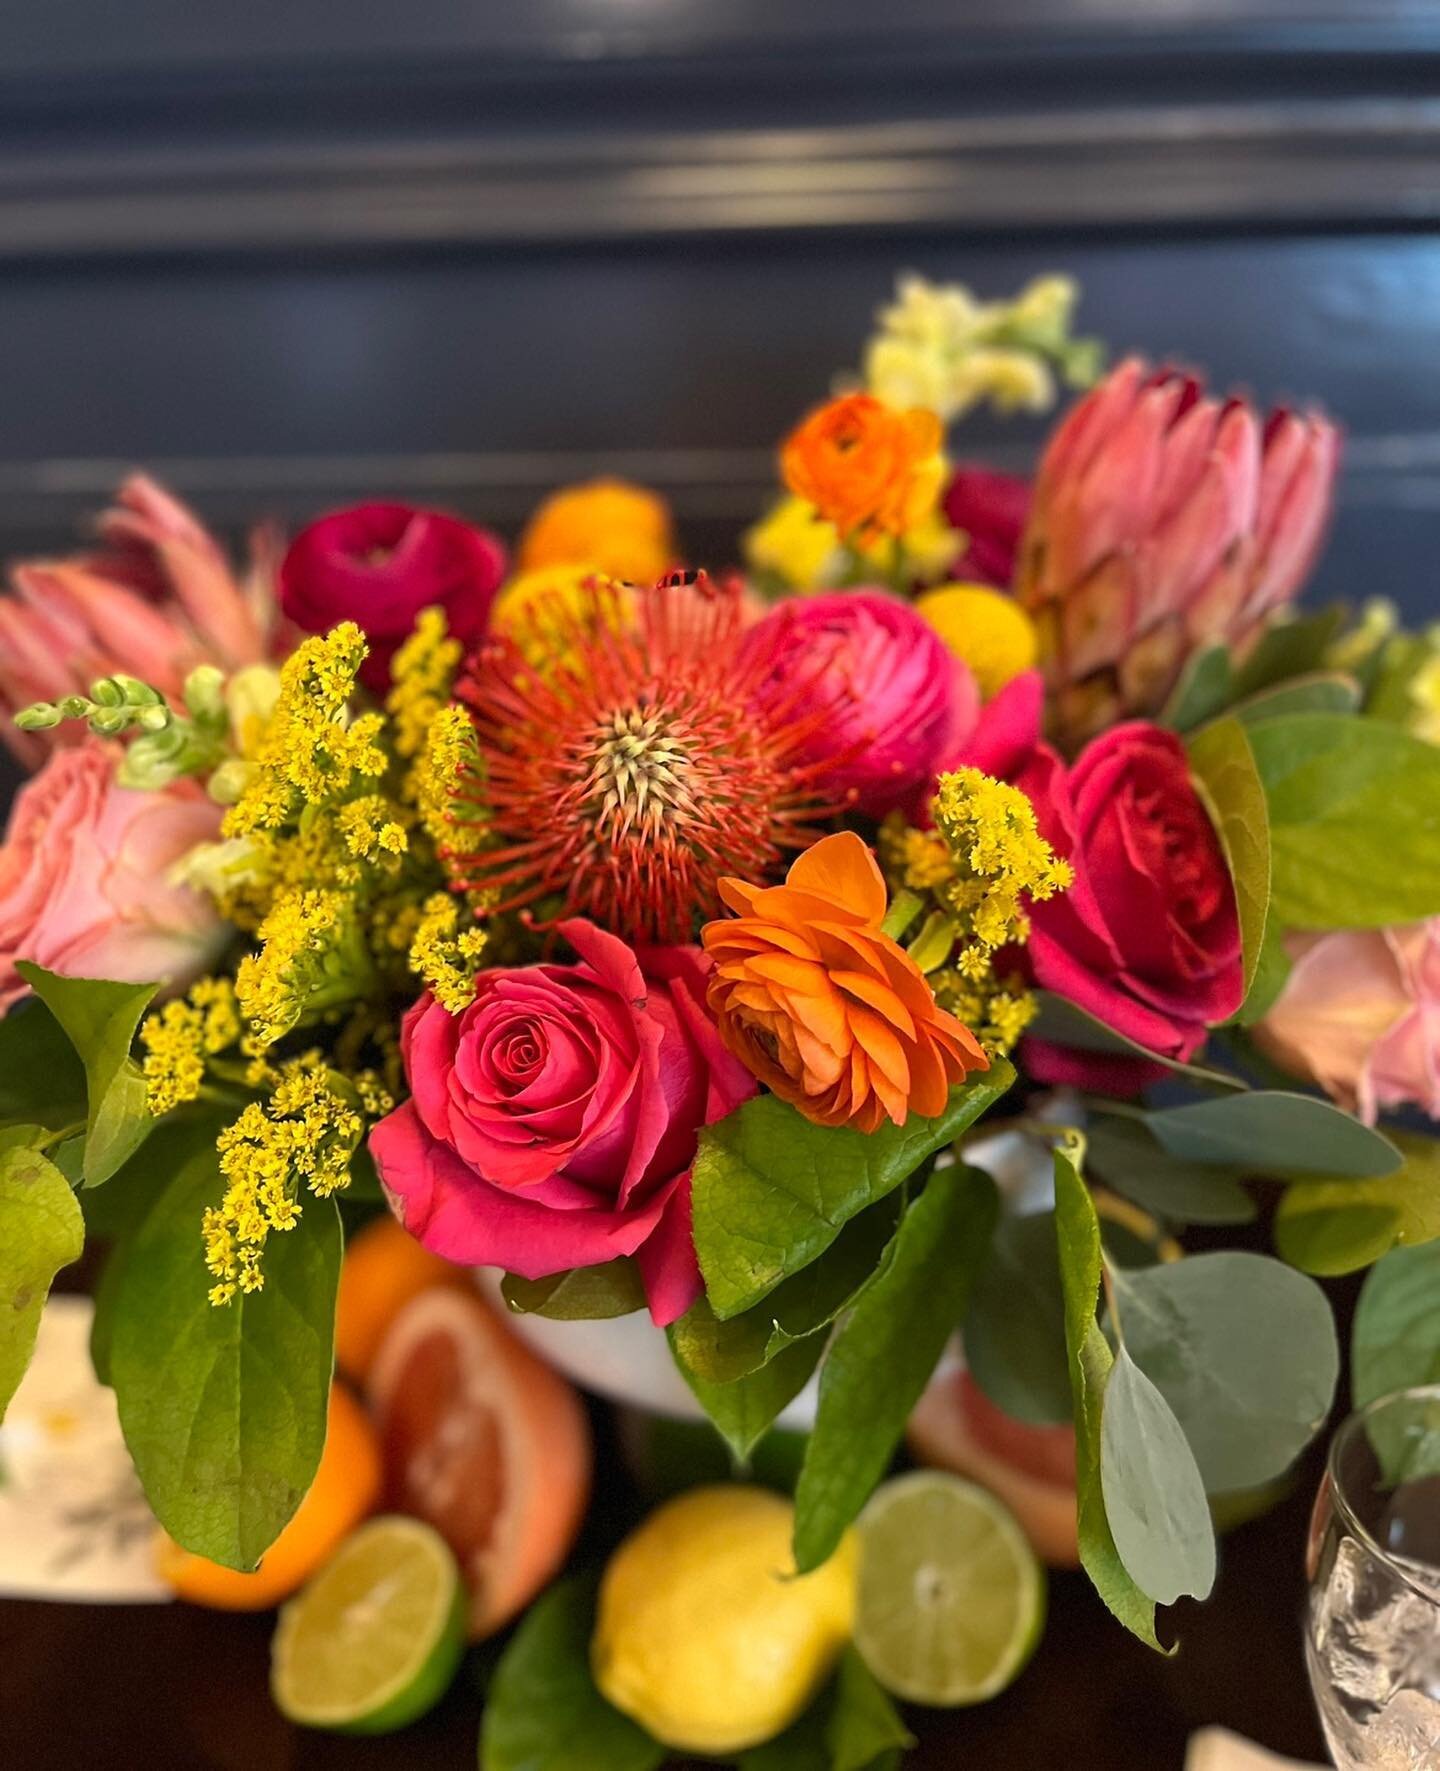 A darling Sister of the Bride requested an intensely vibrant and colorful bridal shower approach full of bright magentas, pinks, oranges and yellows. Limes, lemons, oranges and grapefruits joined the party. Can&rsquo;t wait for the wedding!
@thelinwo